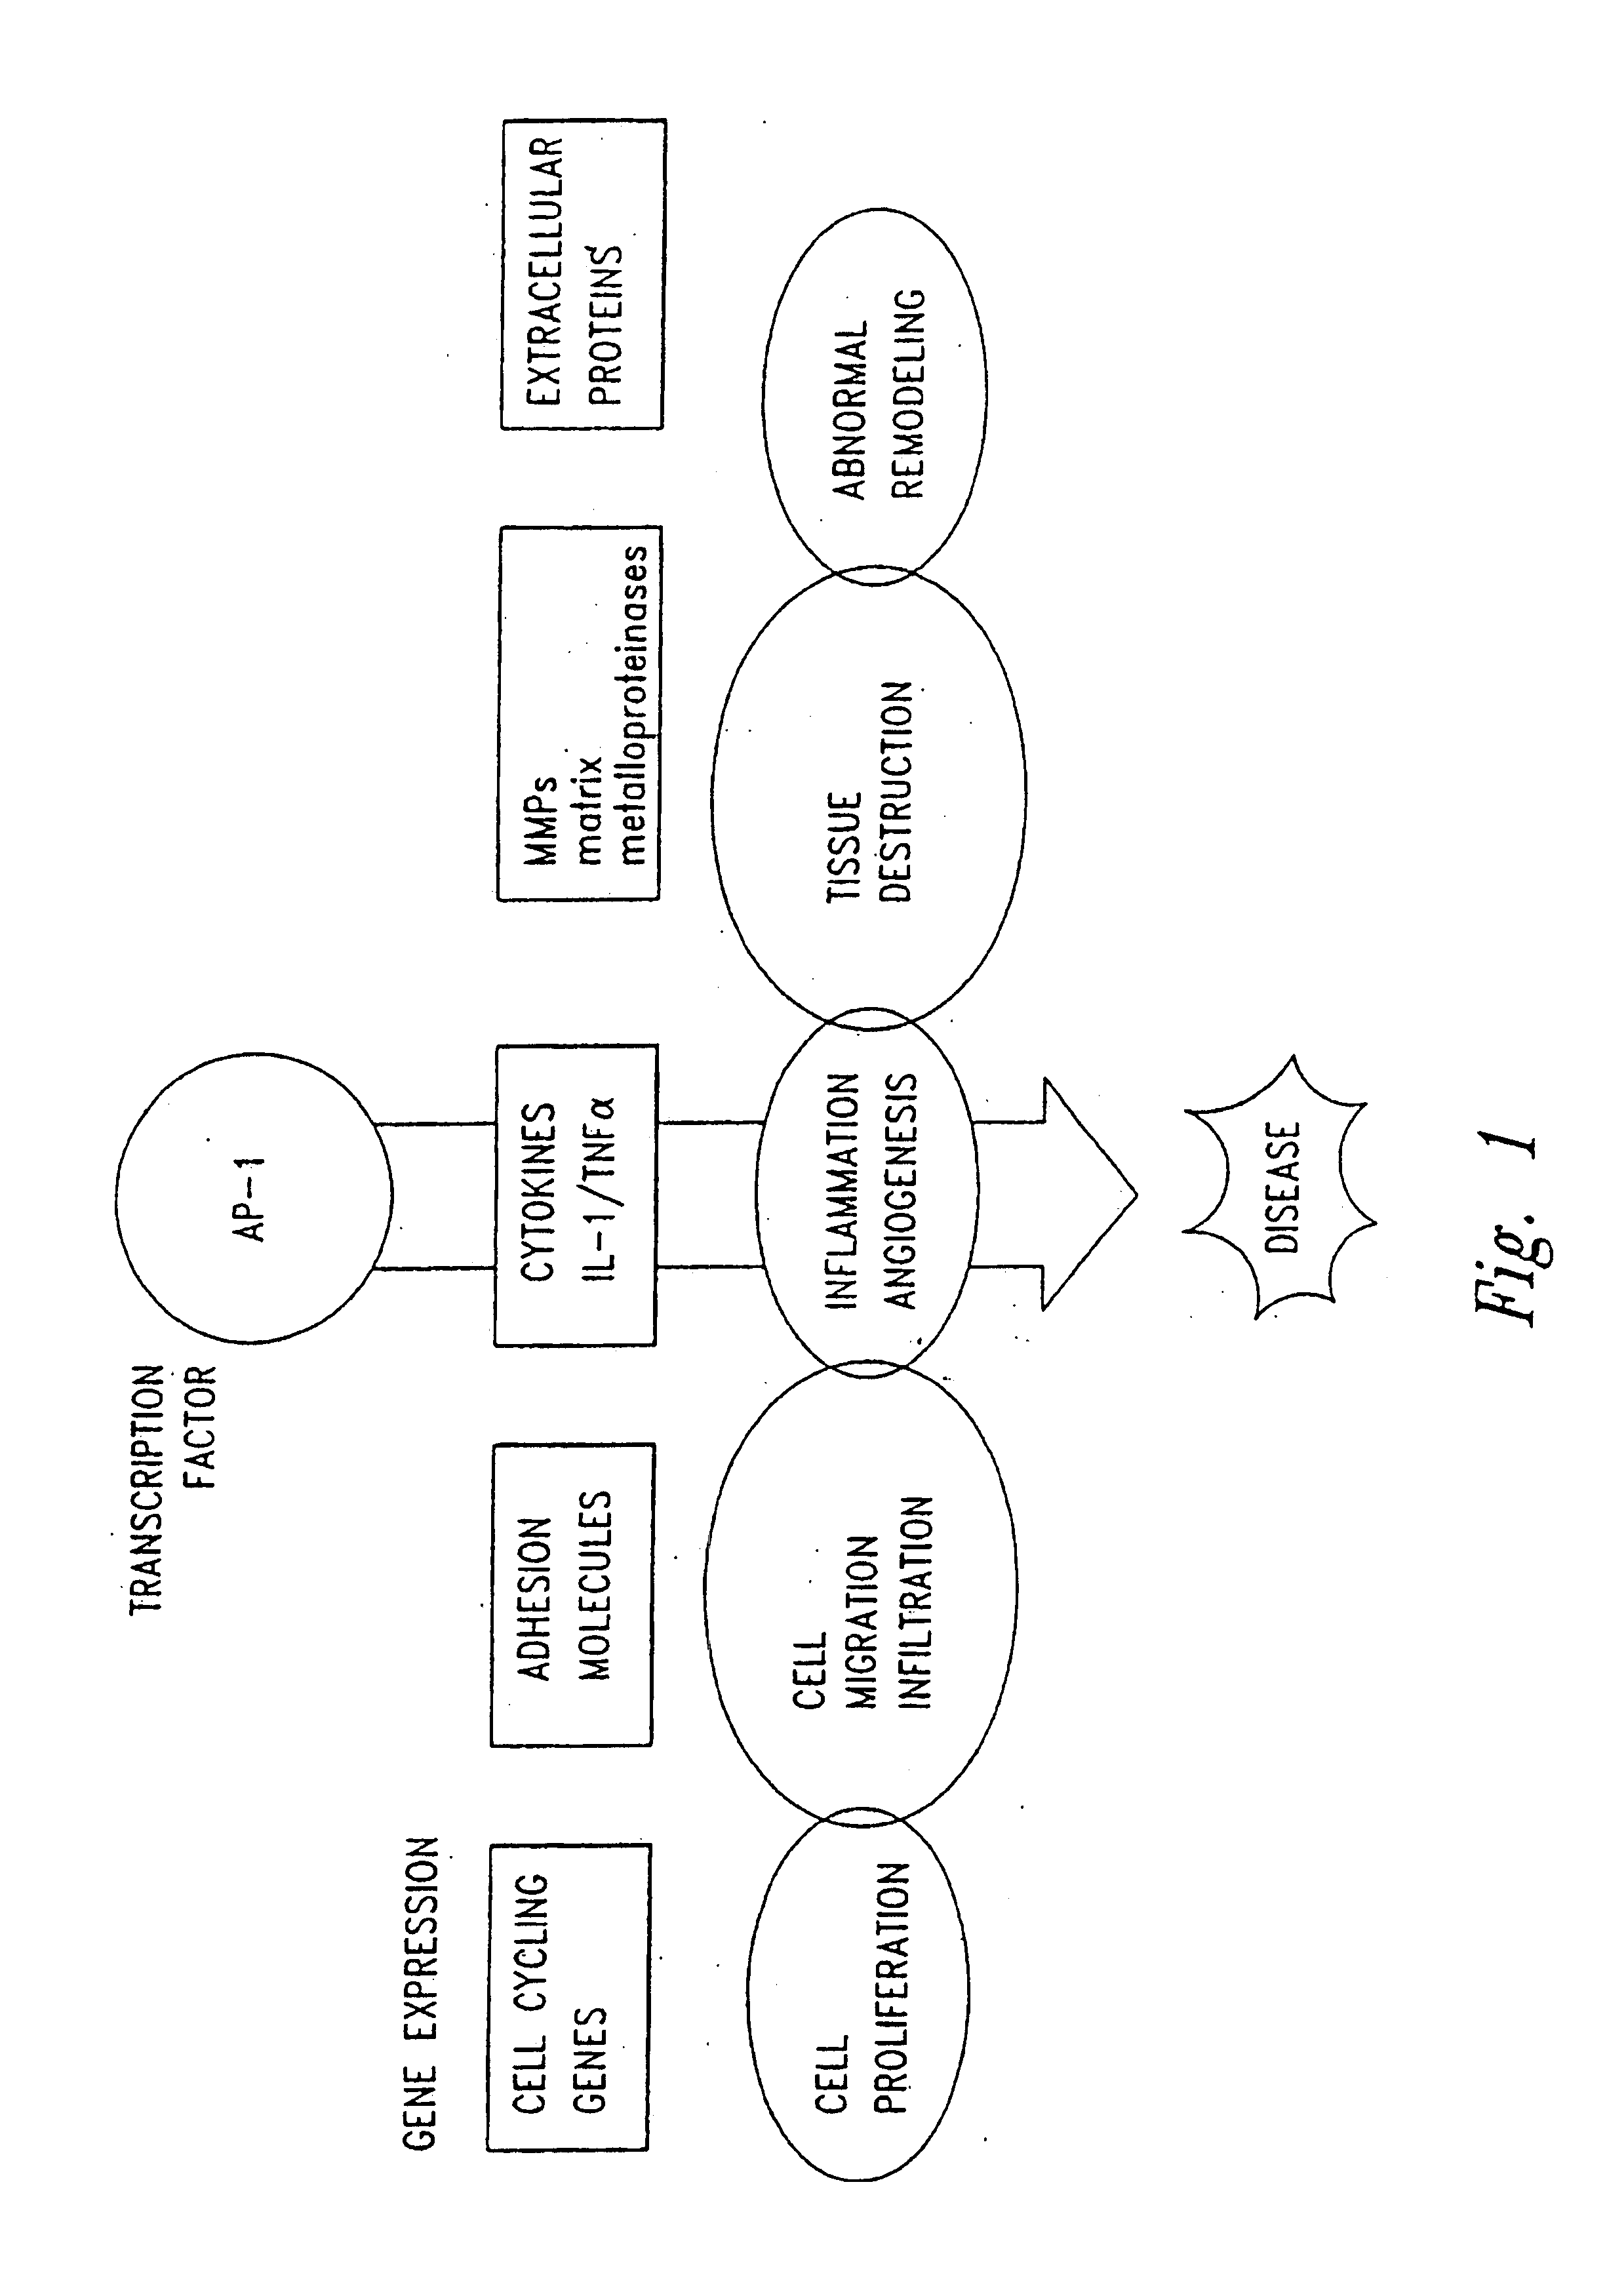 Compositions and methods for treating cellular response to injury and other proliferating cell disorders regulated by hyaladherin and hyaluronans